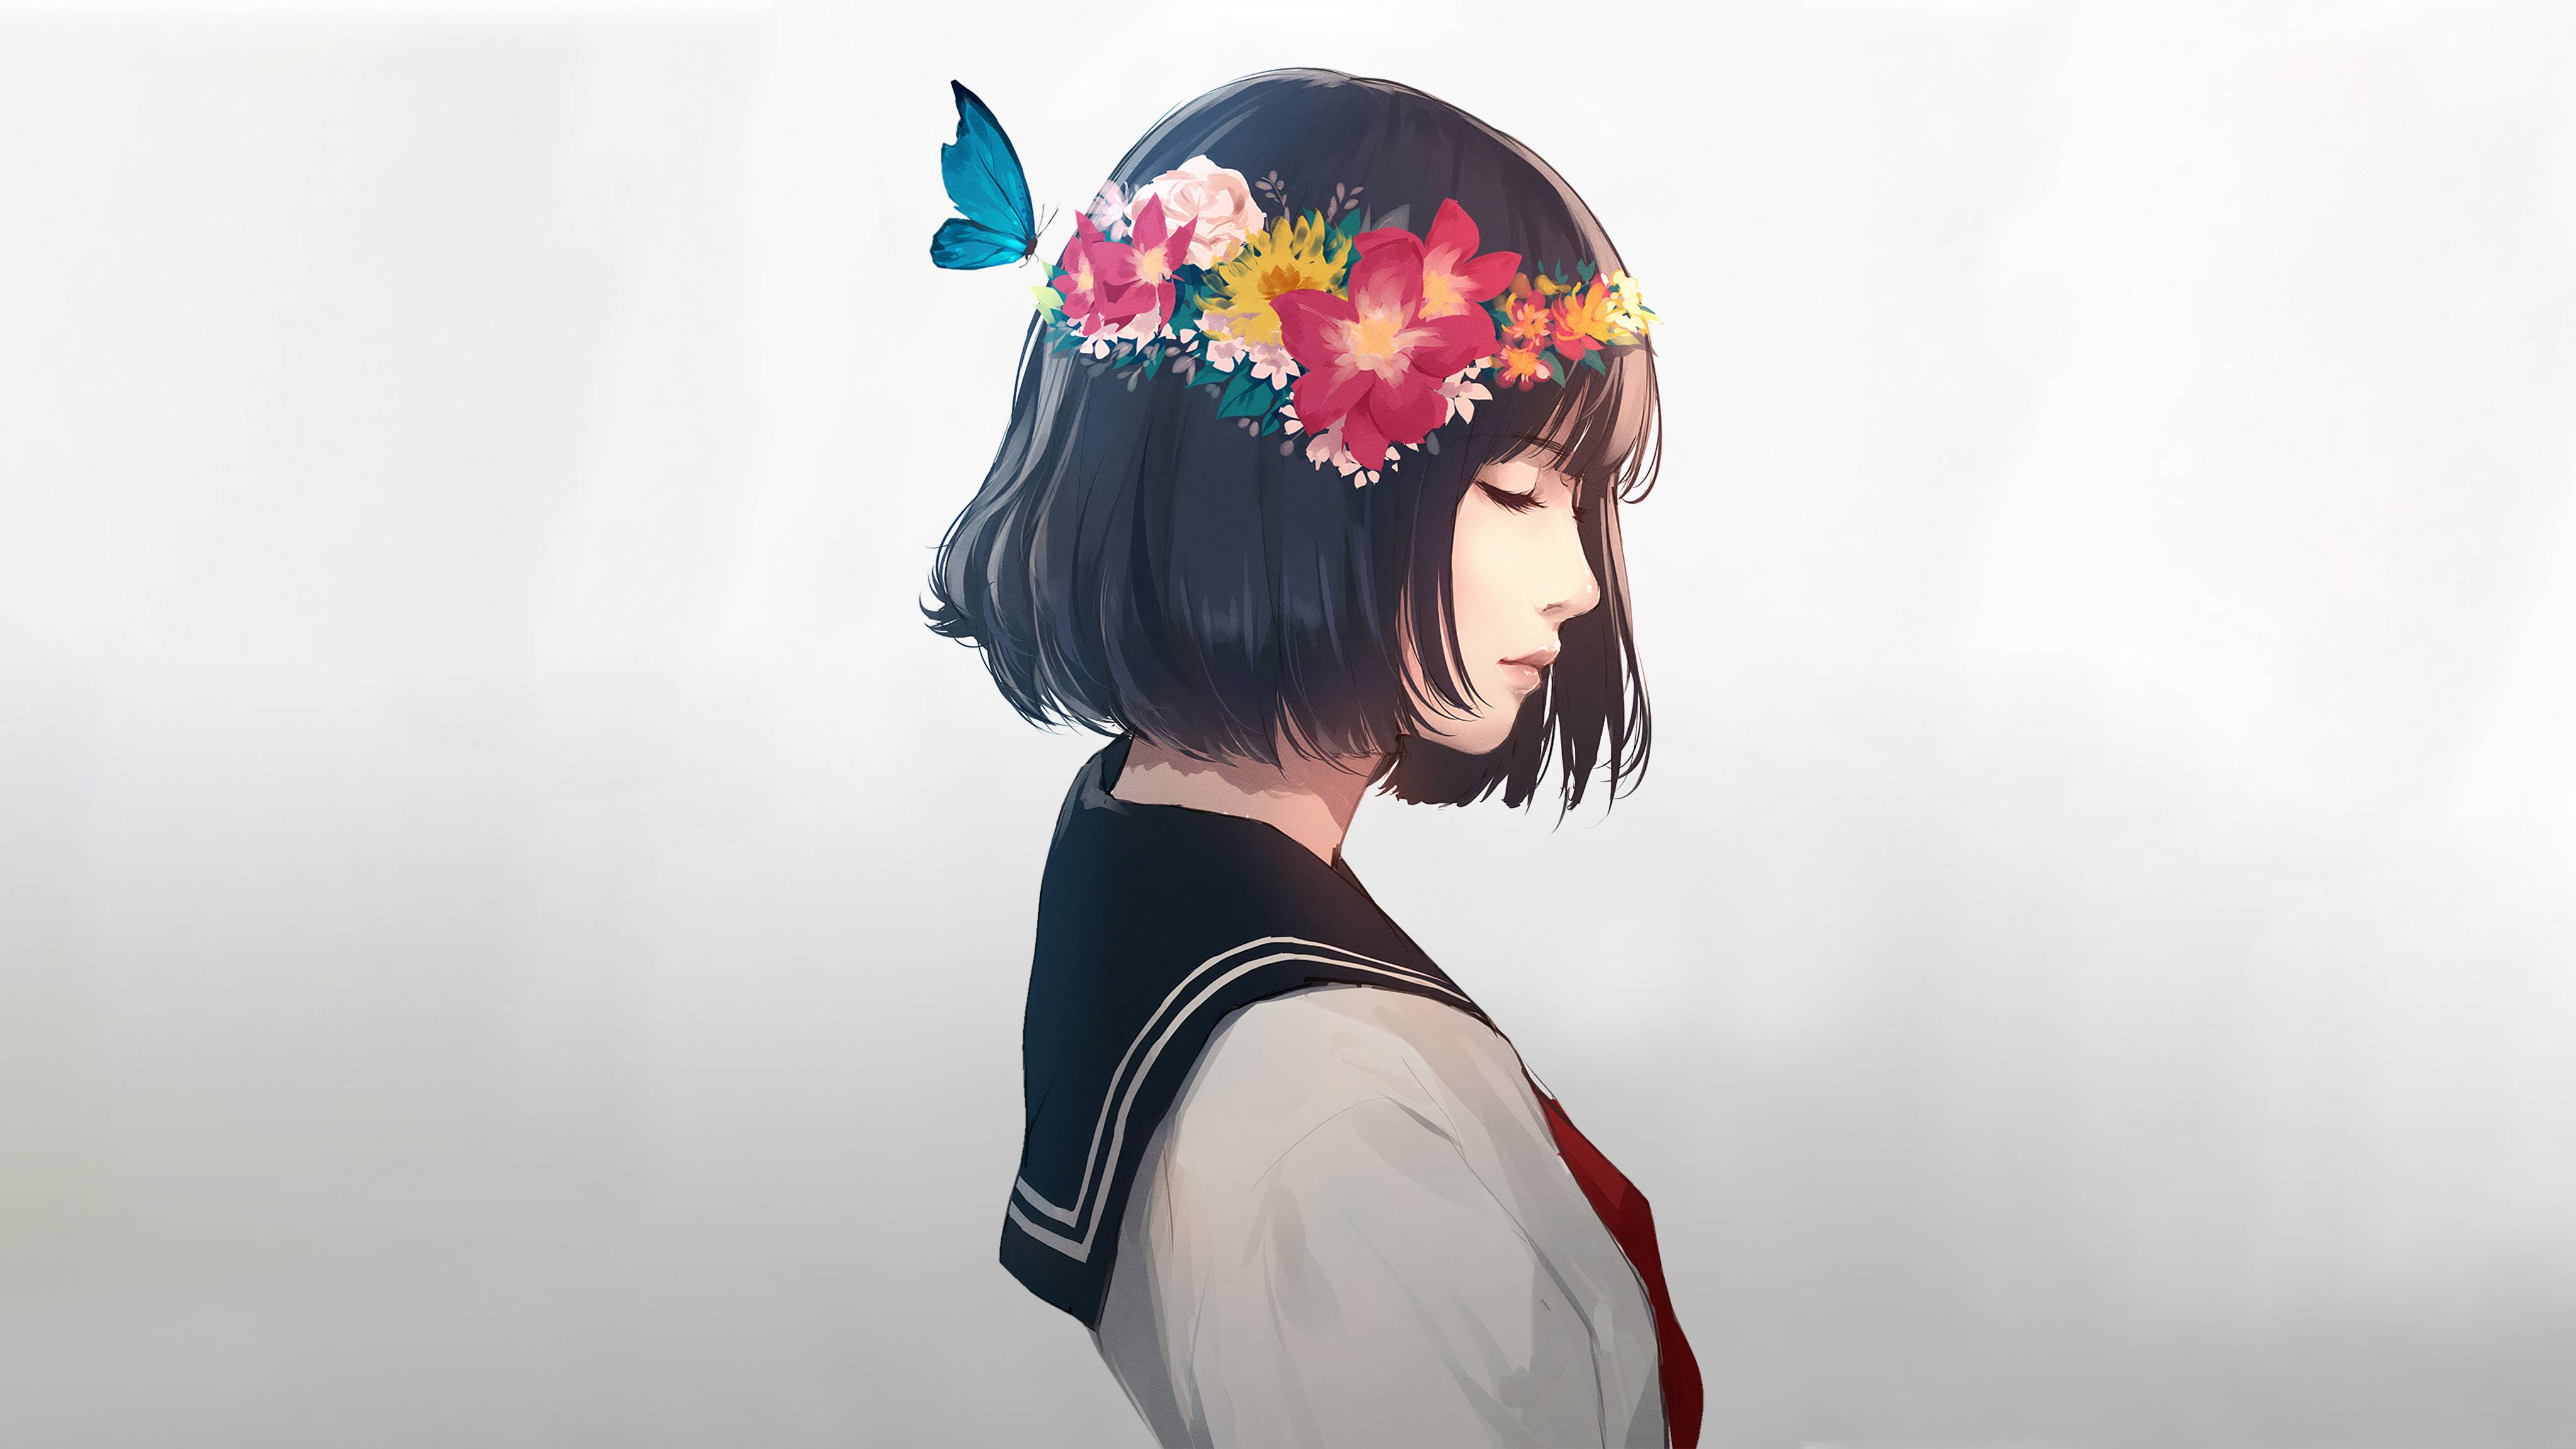 General 4096x2304 digital art black hair short hair sailor uniform flowers flower in hair butterfly white background closed eyes women KD Chen Asian simple background flower crown animals insect face profile dark hair